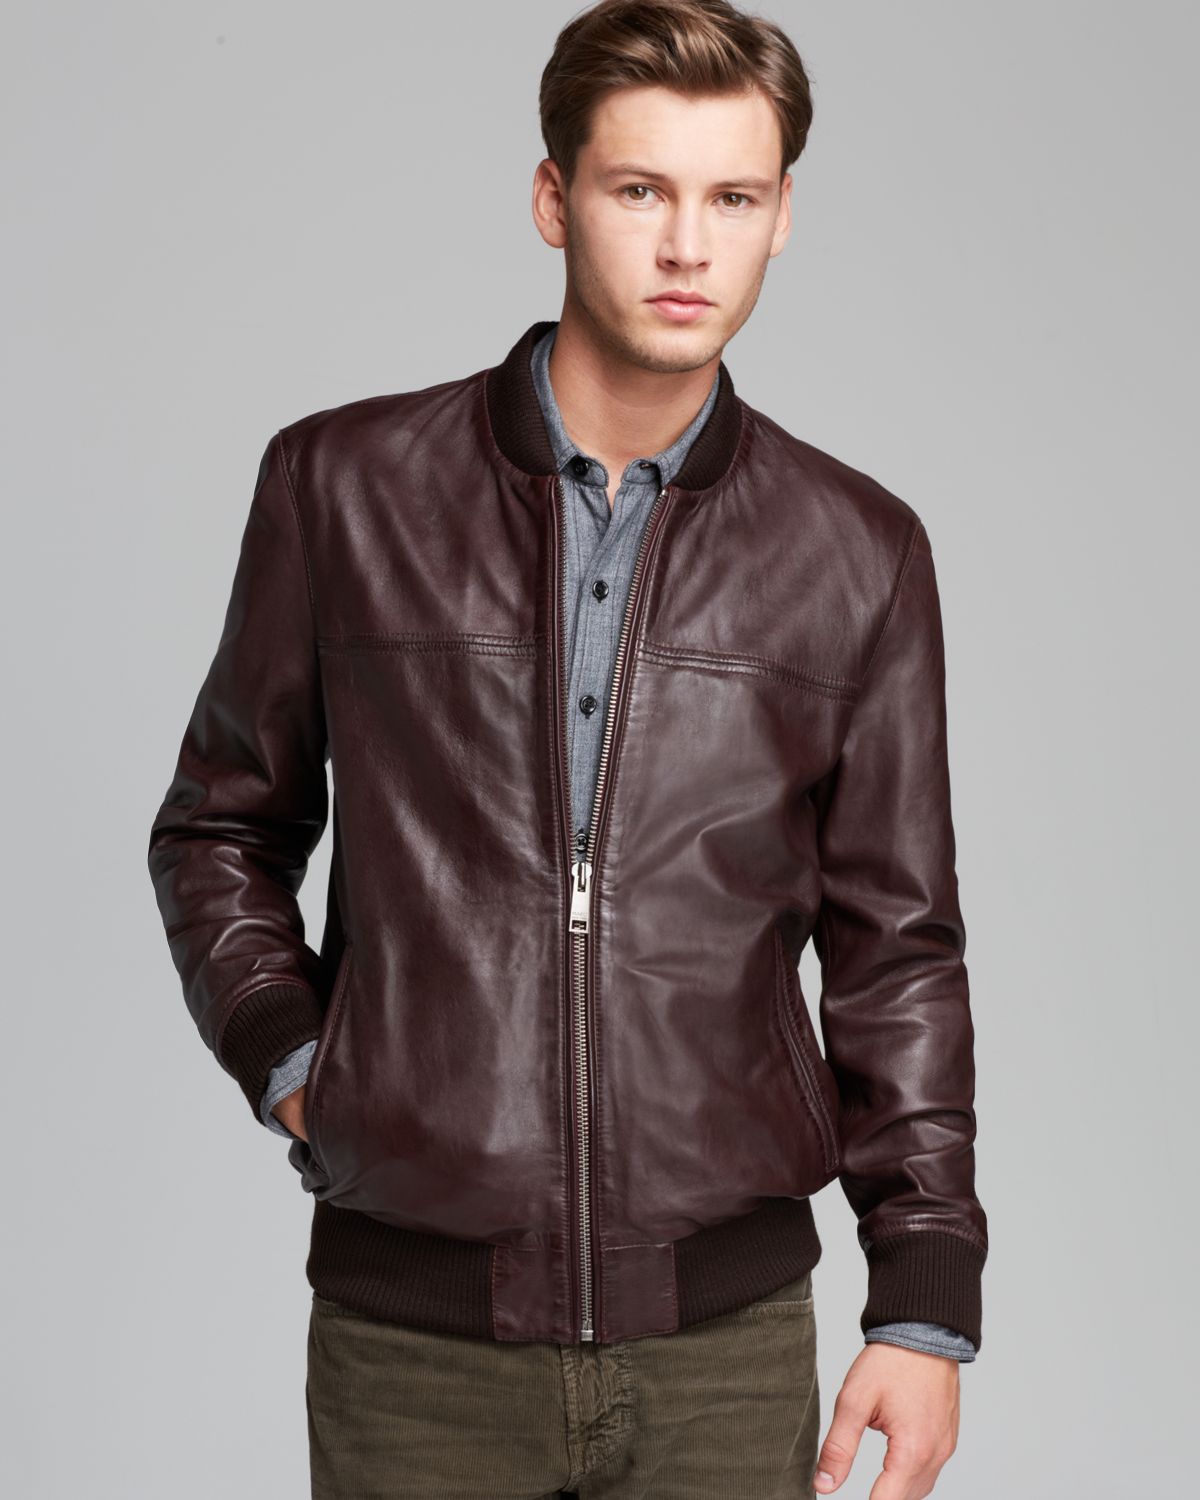 Lyst - Marc New York Quentin Leather Jacket in Red for Men